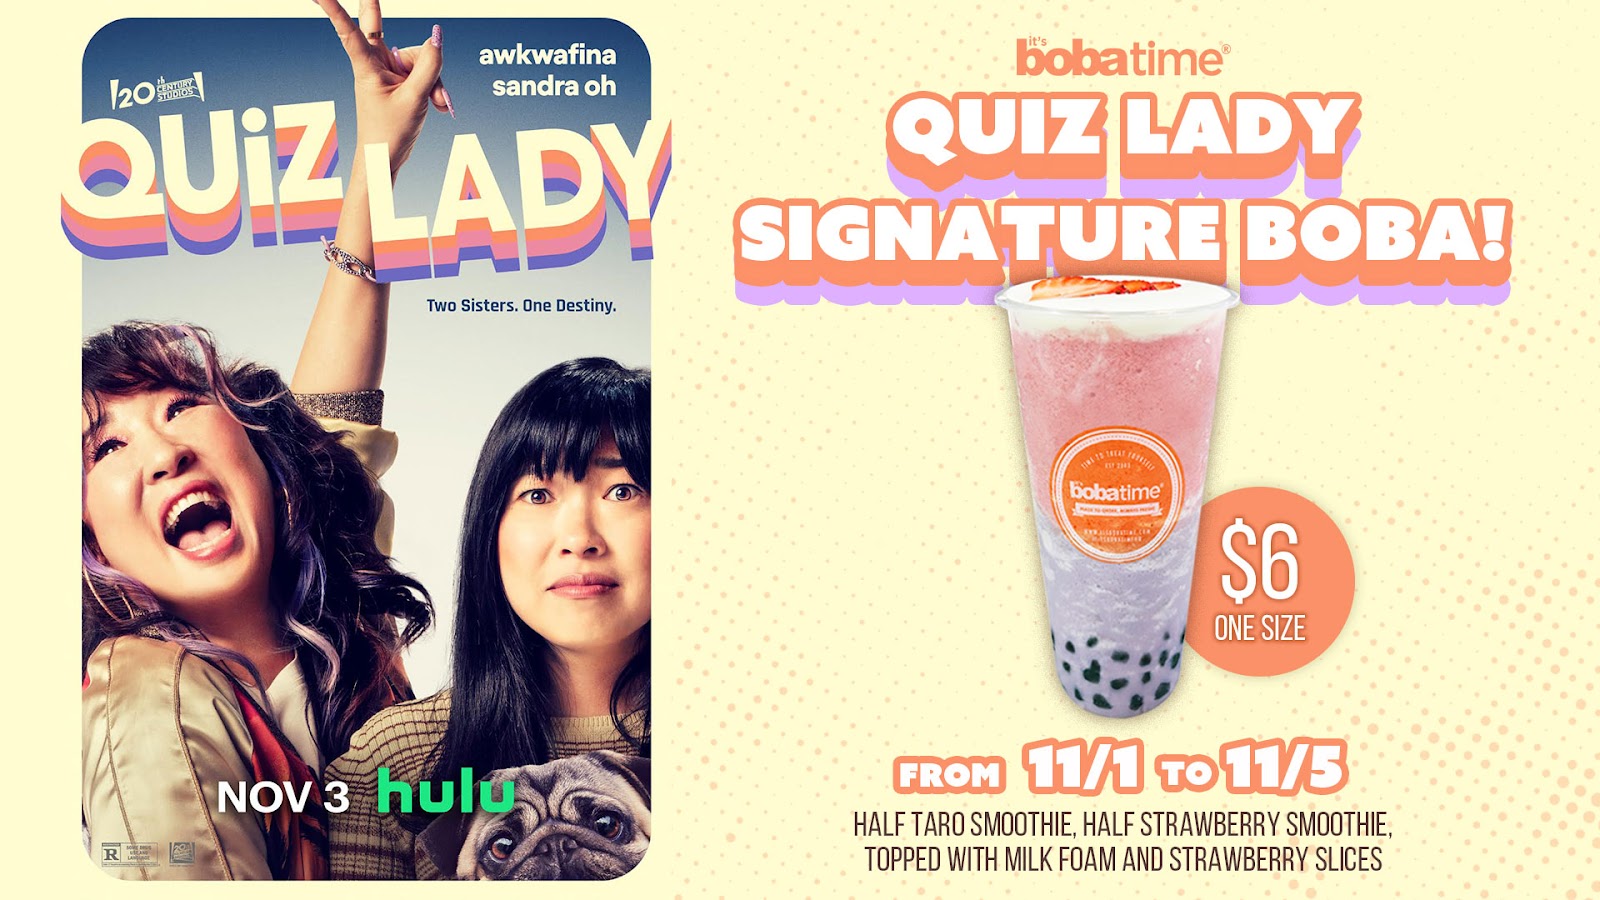 It's Boba Time teams with Hulu's Quiz Lady for a special boba gieaway. Between November 1-5, It's Boba Time will post a trivia question on their instagram. Winners will get a chance to win free boba from participating stores.